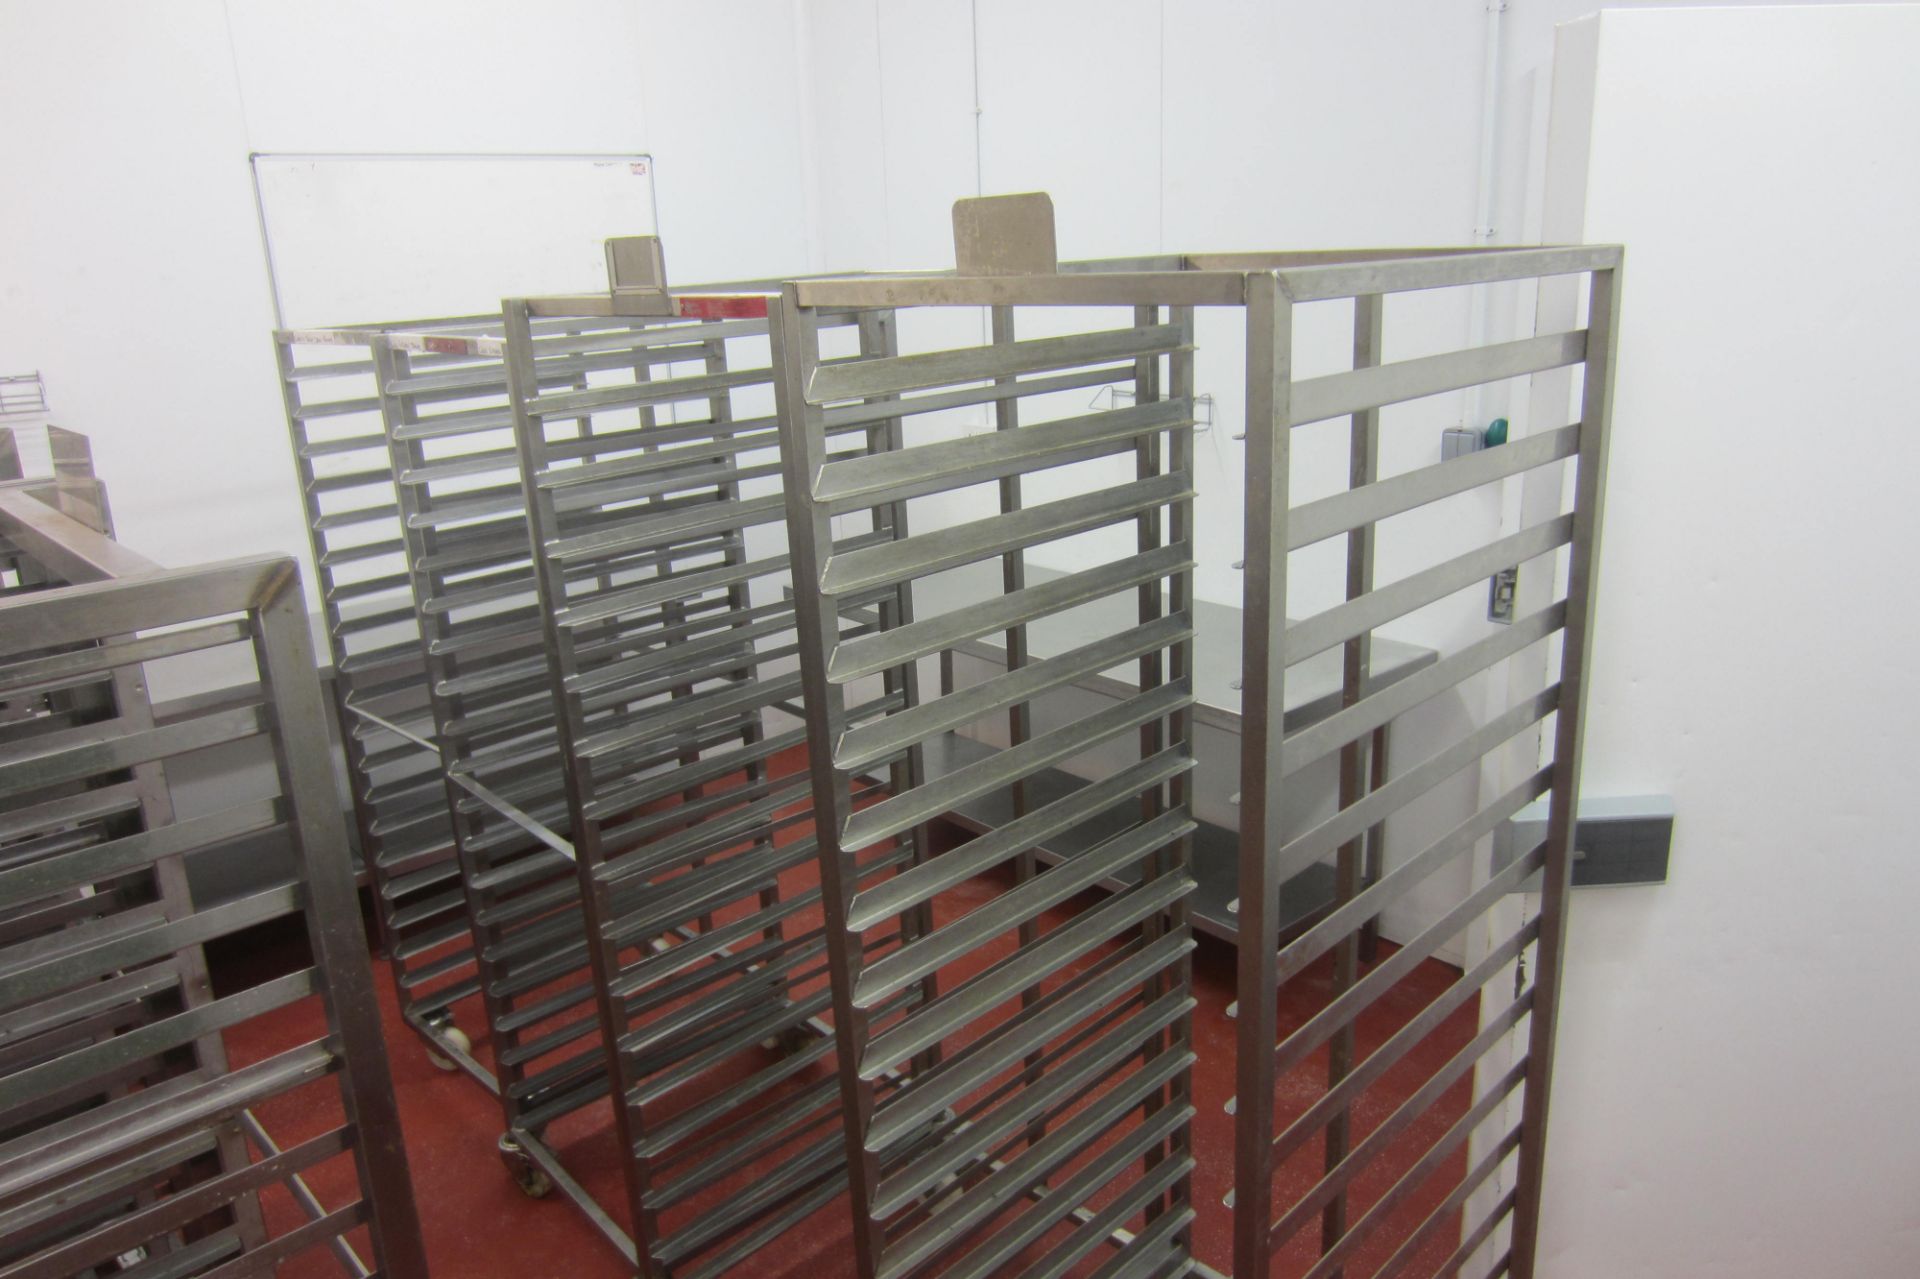 4 x Large Stainless Steel 16 & 20 Rack Gastro Trolleys (No Trays)